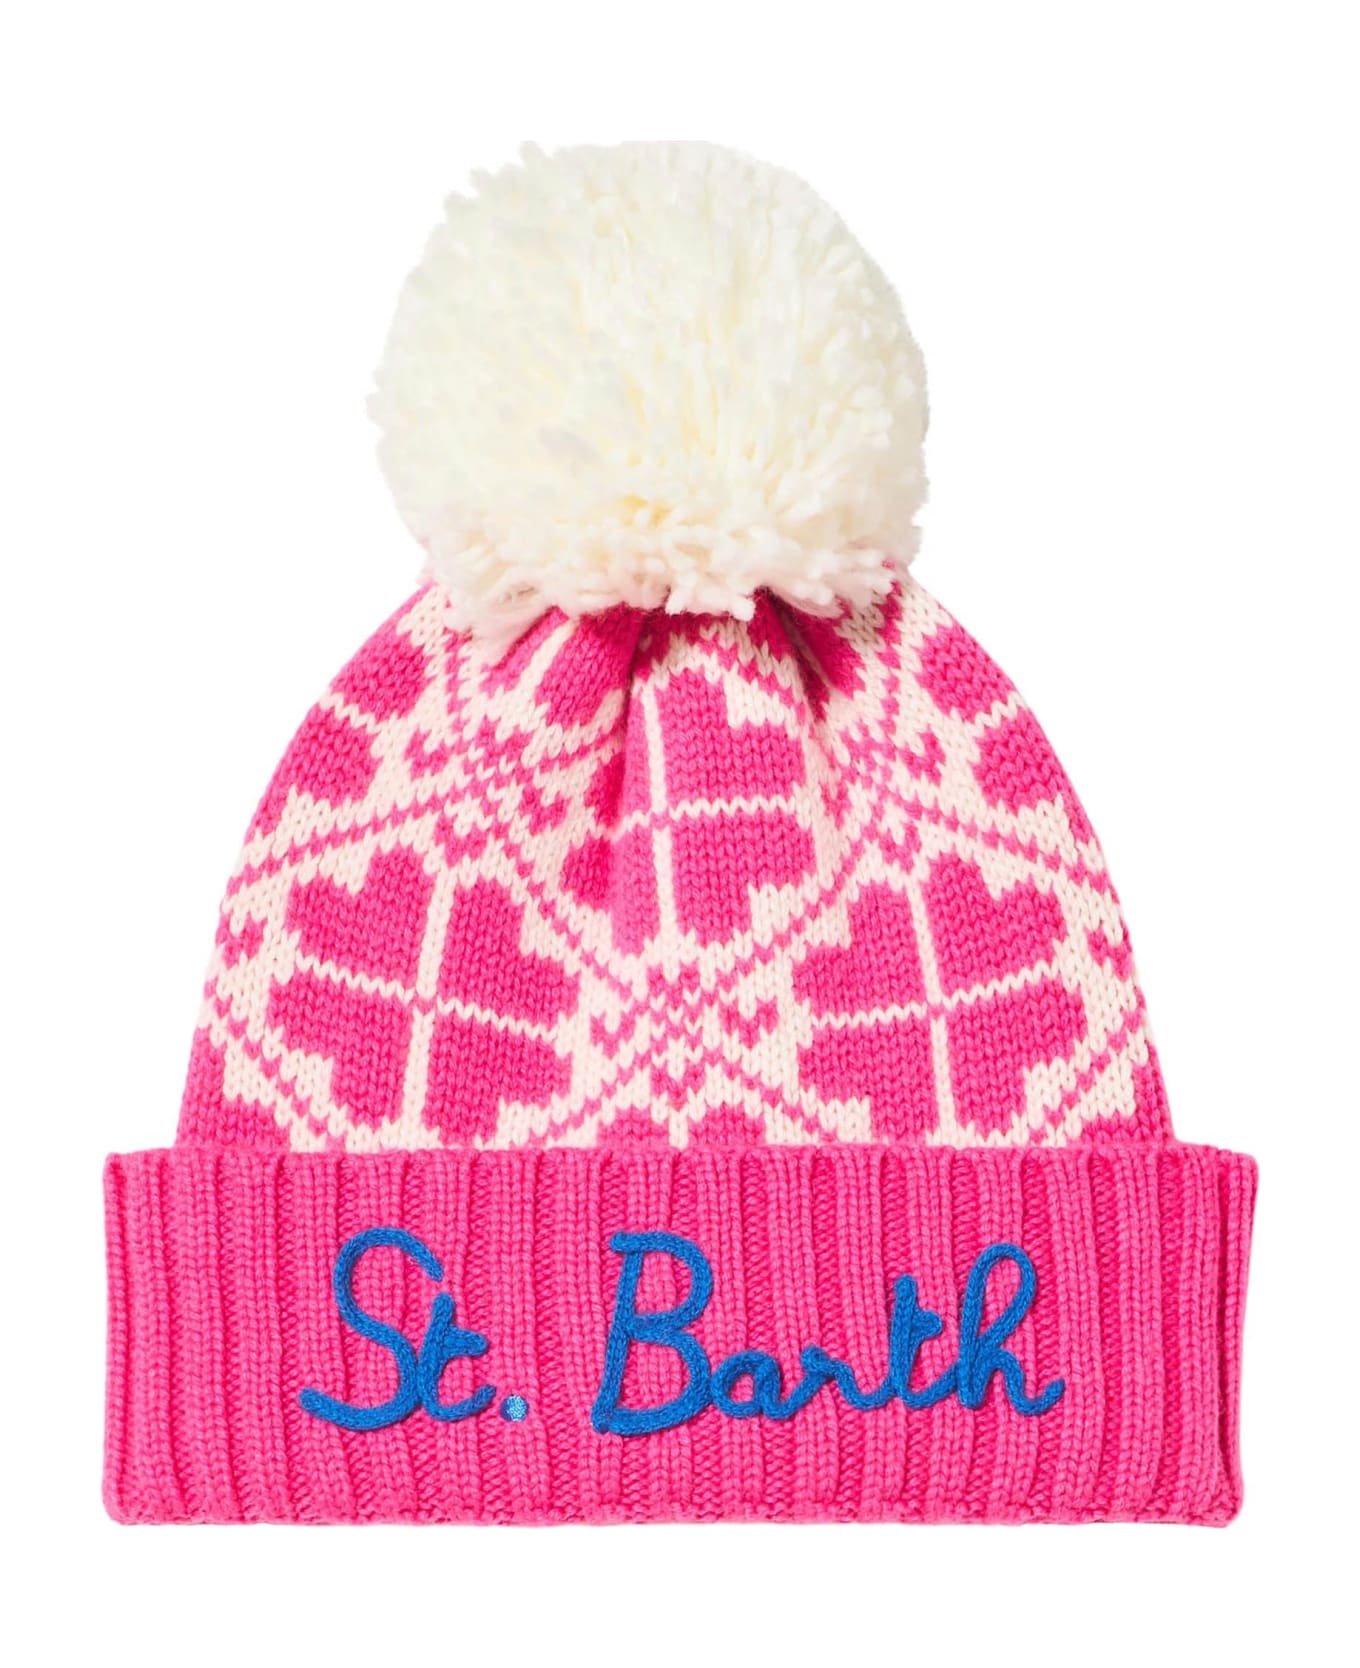 MC2 Saint Barth Woman Fluo Pink Beanie With Pattern - PINK